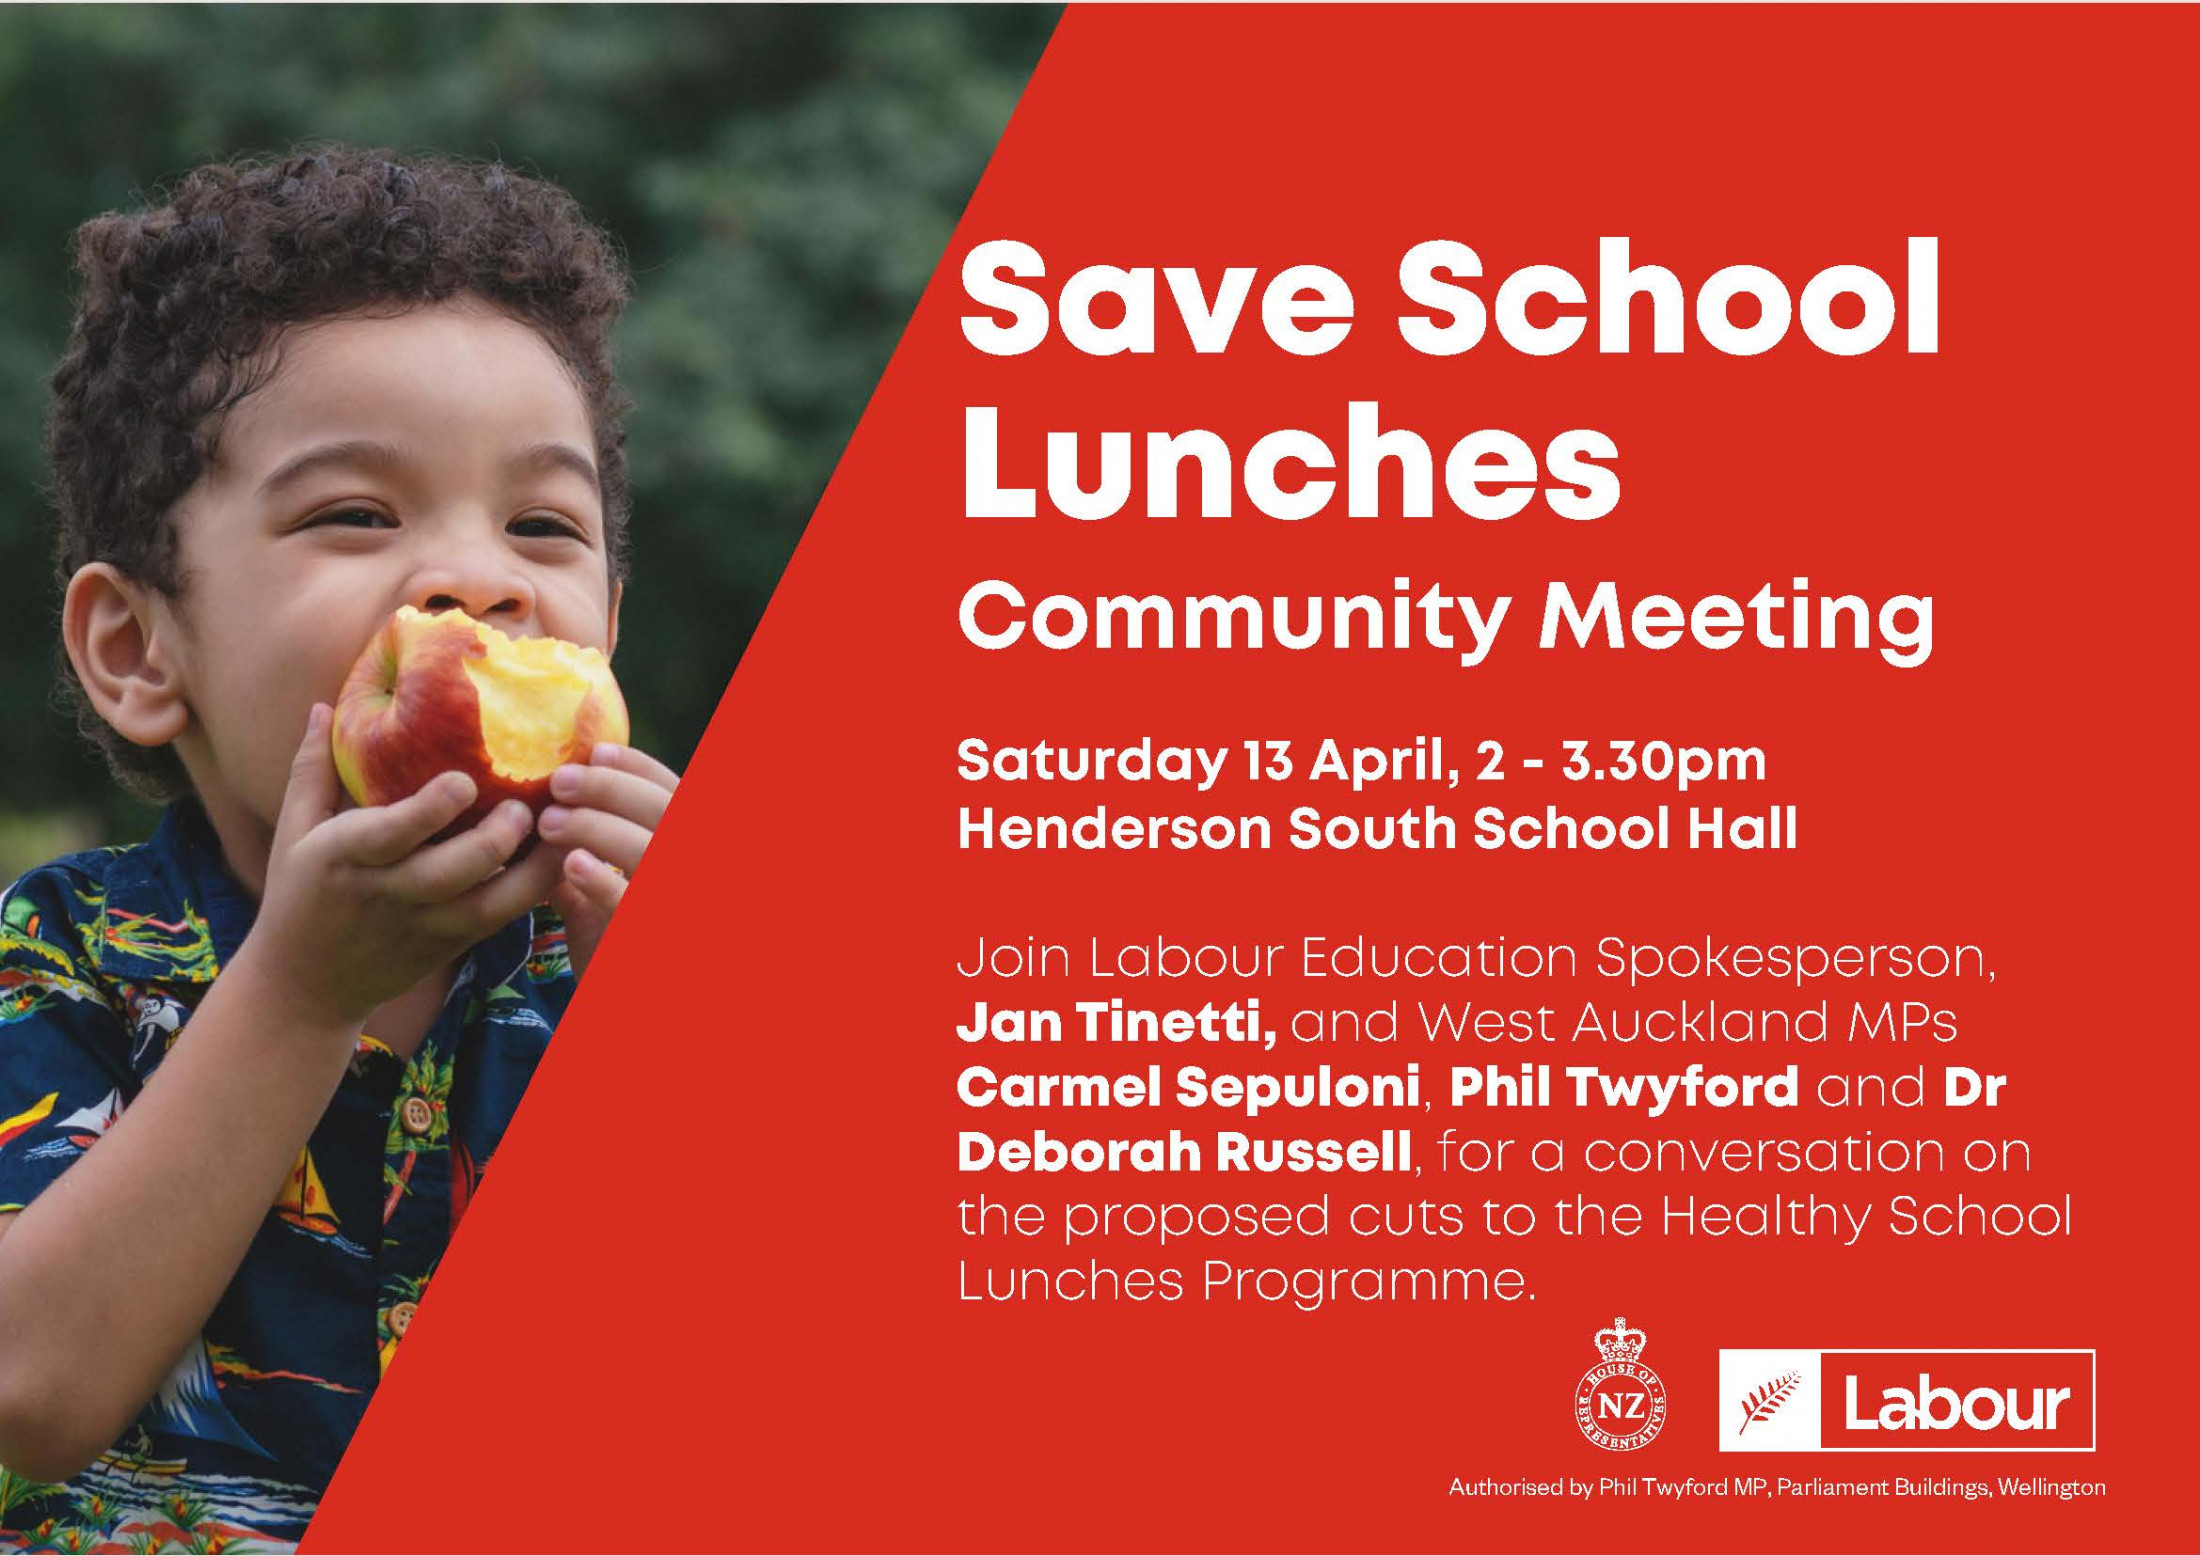 Upcoming Community Meeting - Save School Lunches